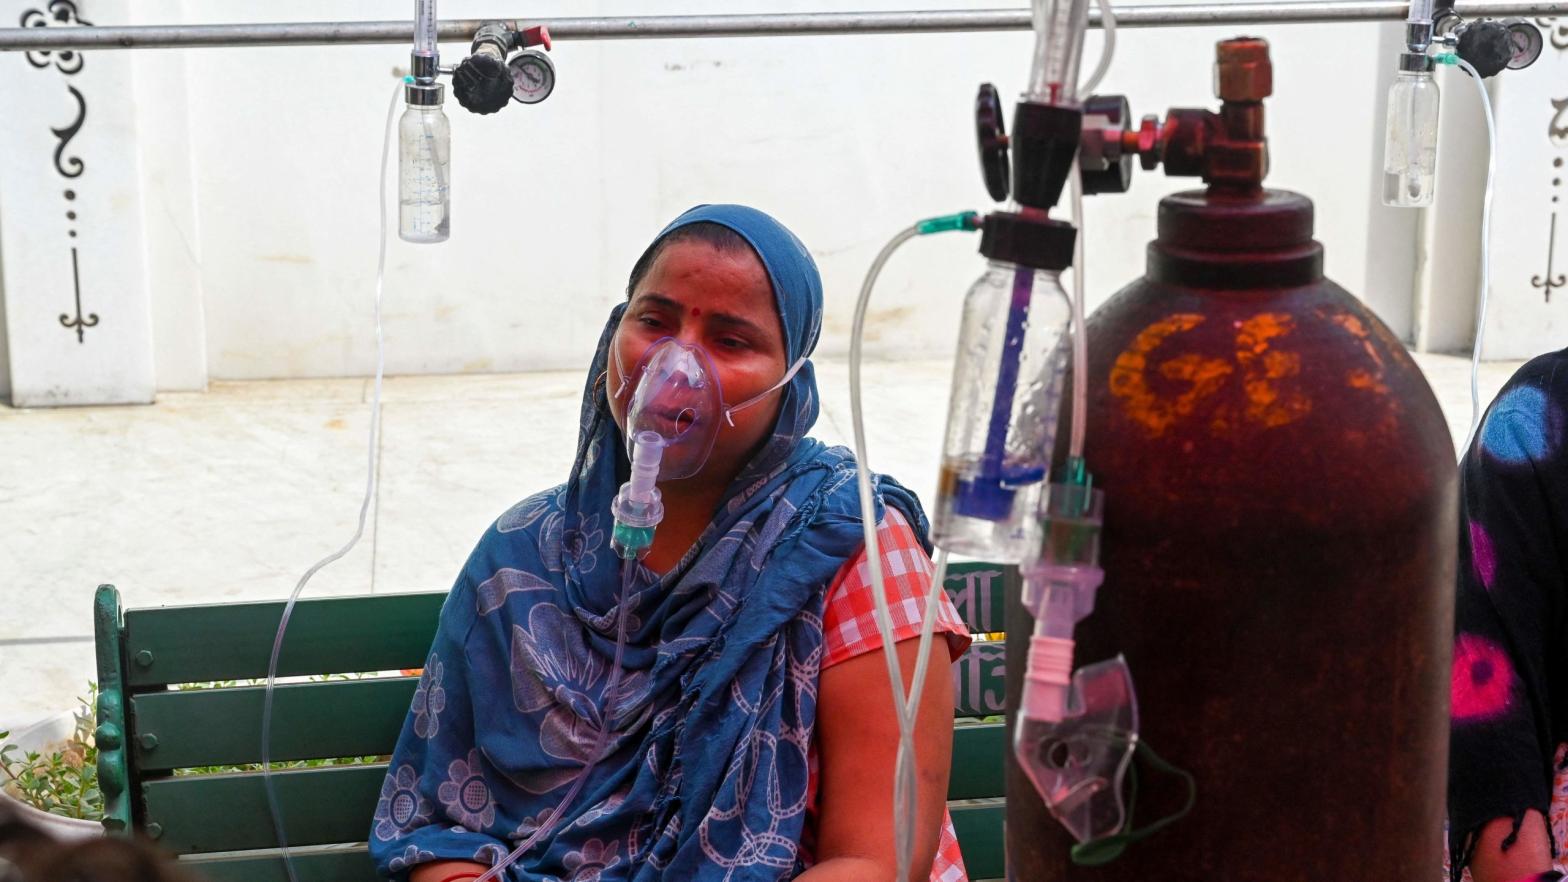 A covid-19 patient breathes with the help of oxygen provided by a Gurdwara, a place of worship for Sikhs, under a tent installed along the roadside in Ghaziabad, India on April 28, 2021.  (Photo: Prakash Singh/AFP, Getty Images)